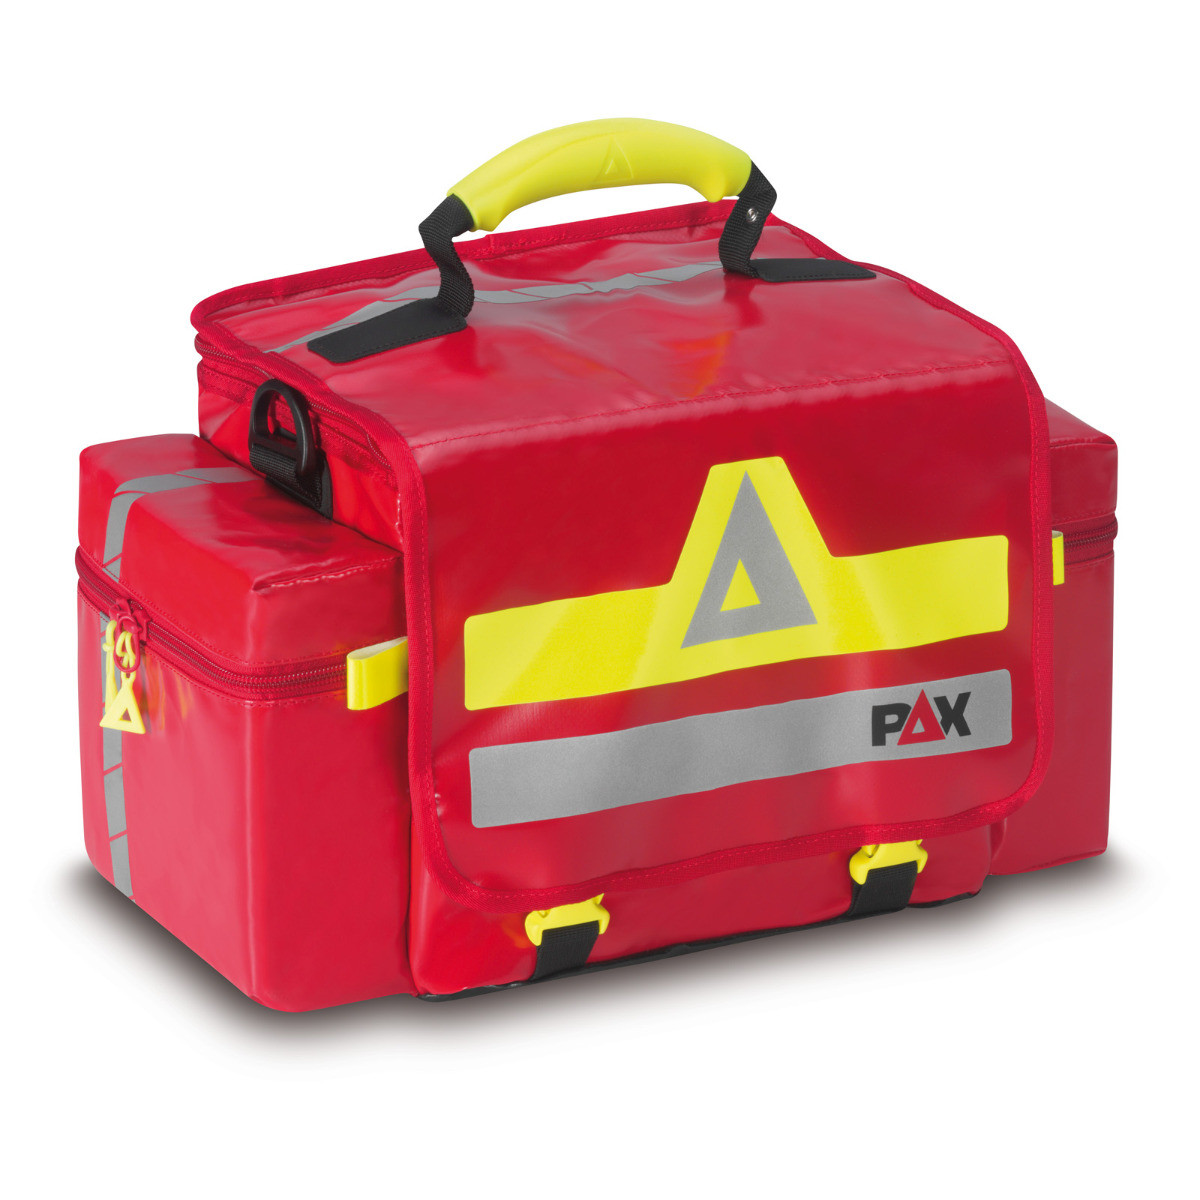 PAX First Responder, colored red, material PAX-Plan